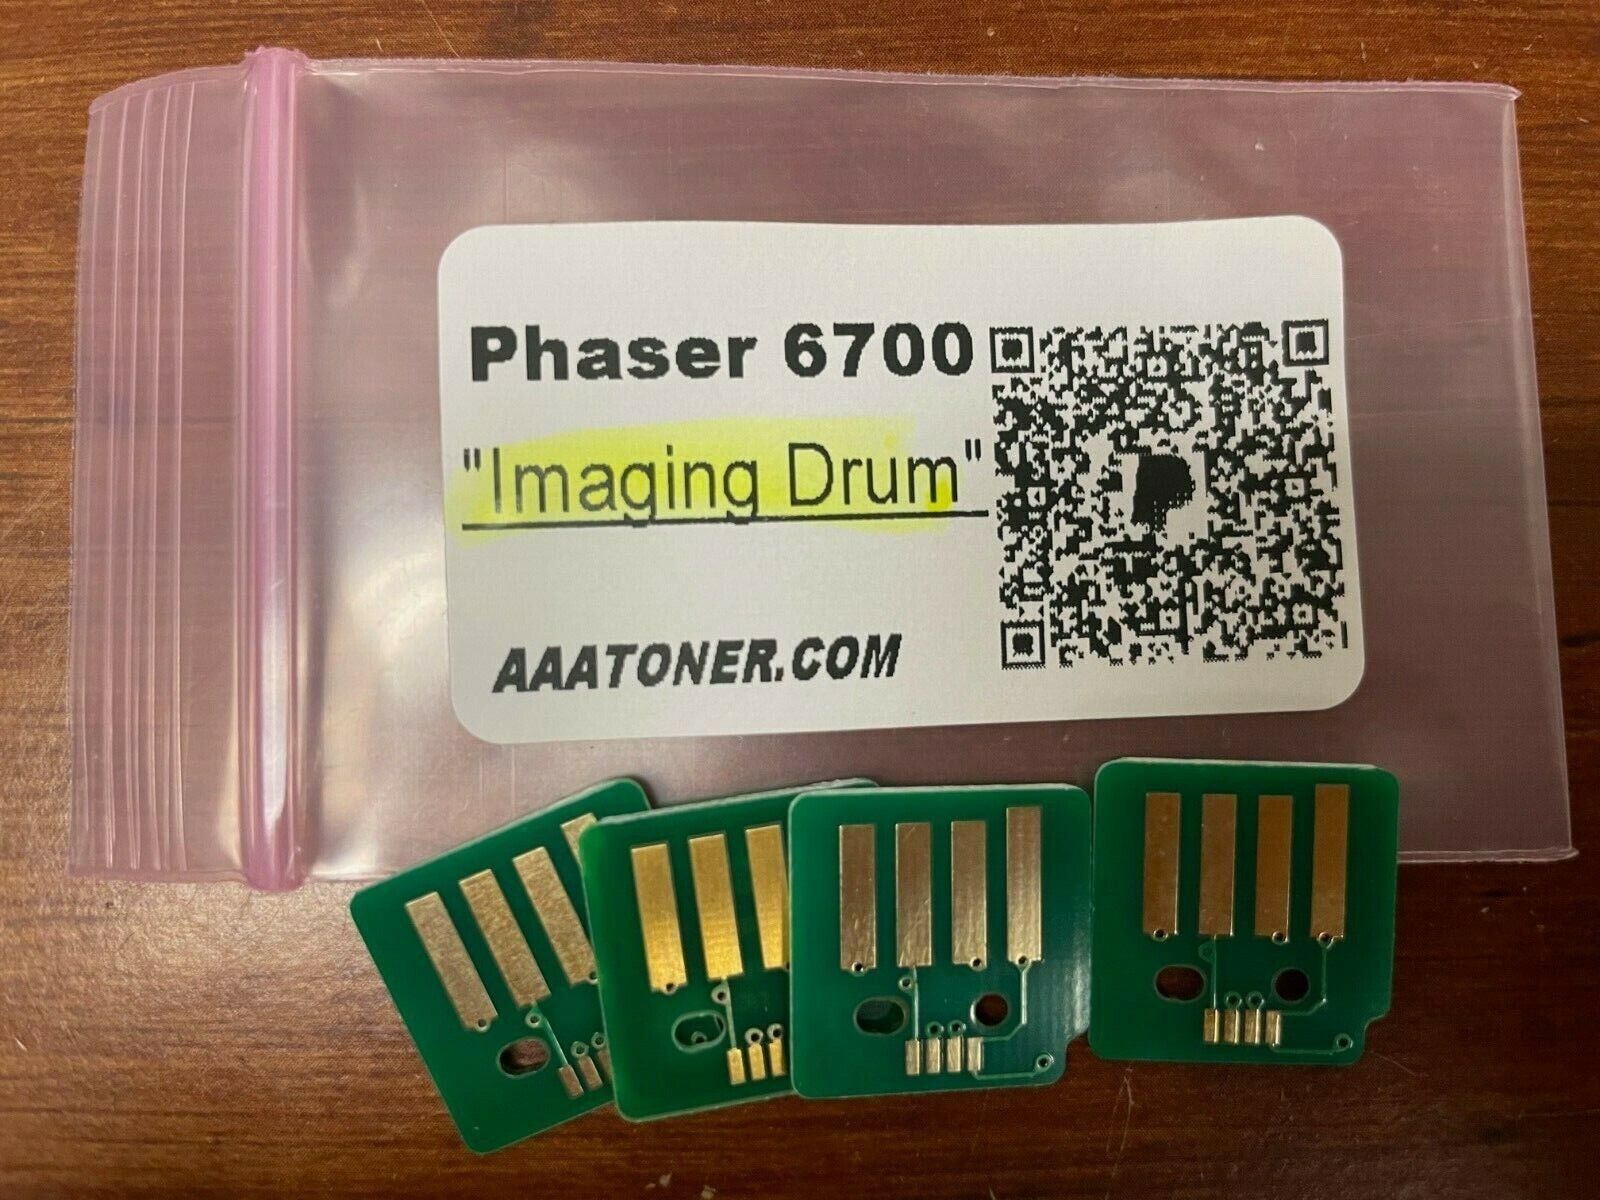 4 x DRUM Chip (IMAGING UNIT) for Xerox Phaser 6700, 6700N, 6700DX, 6700DN Refill